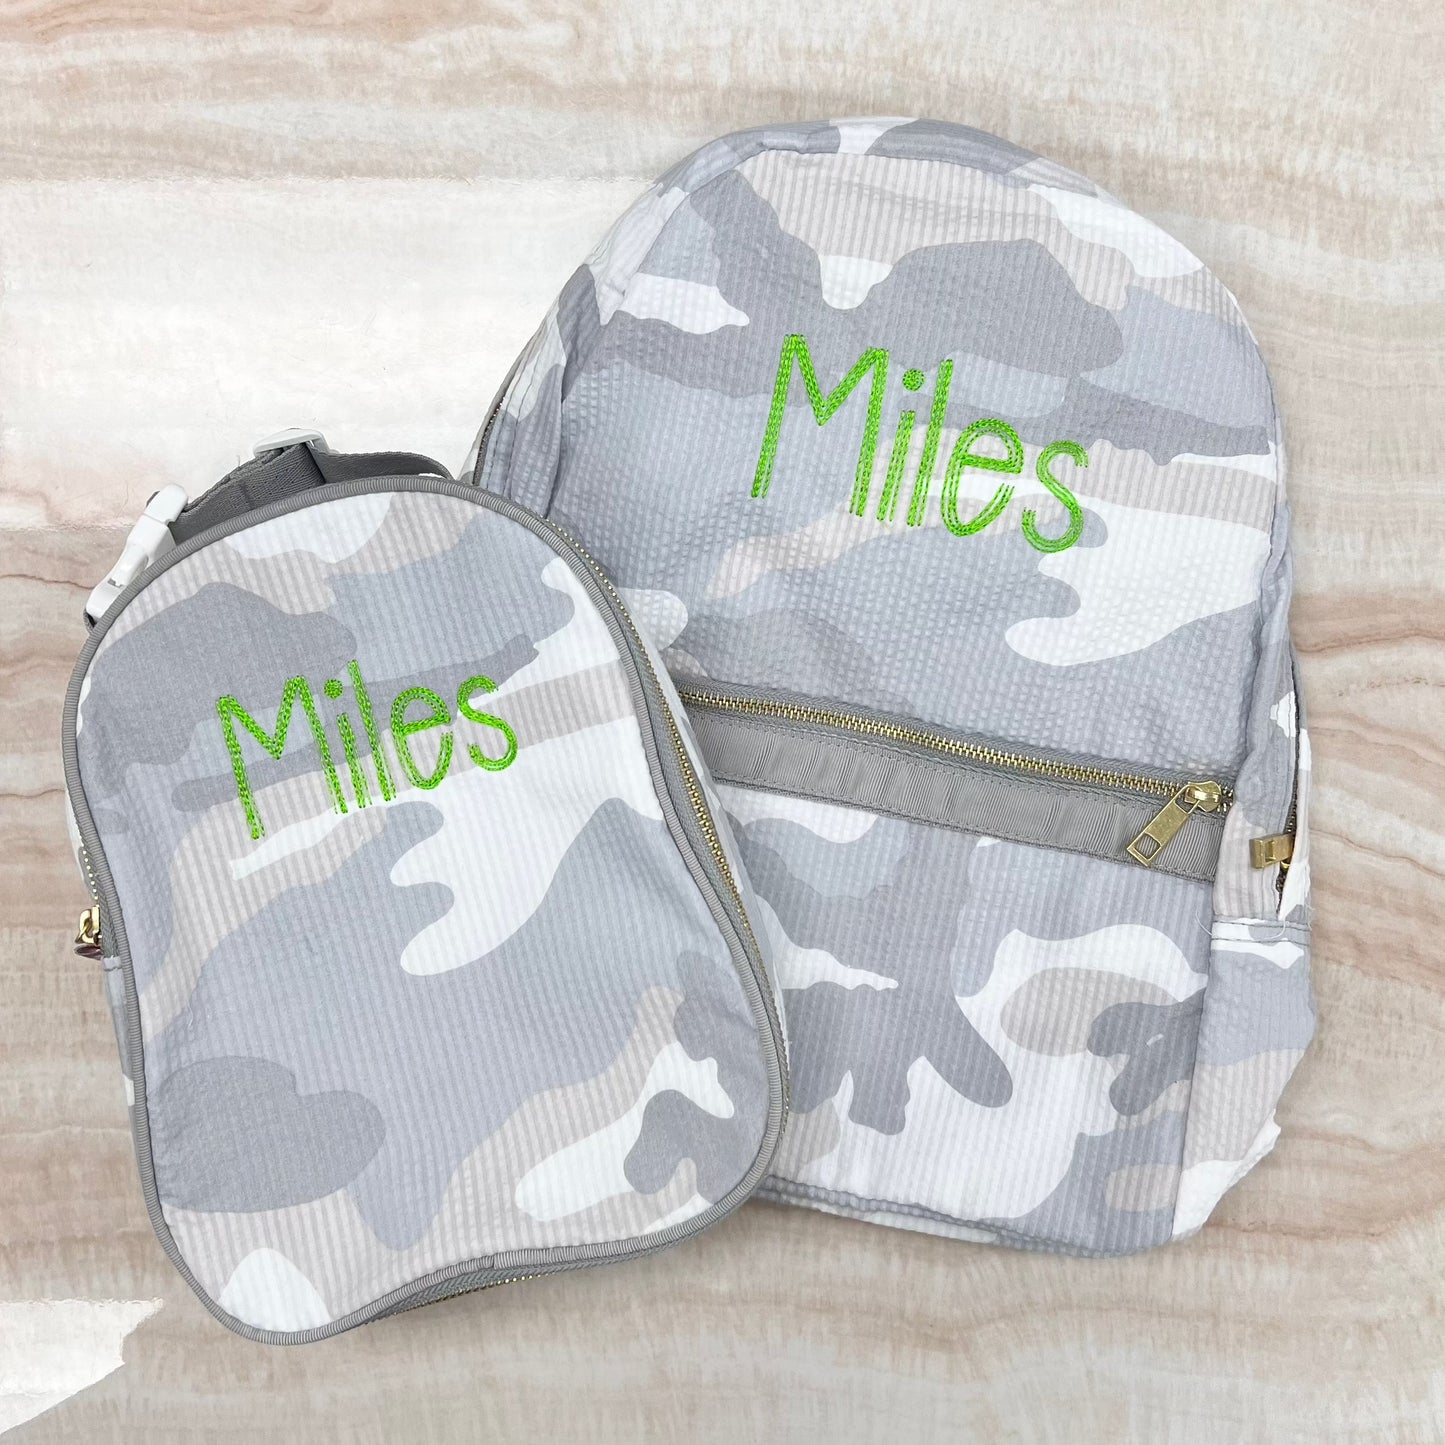 Personalized Seersucker Snow Camo Lunch Box - Give Wink